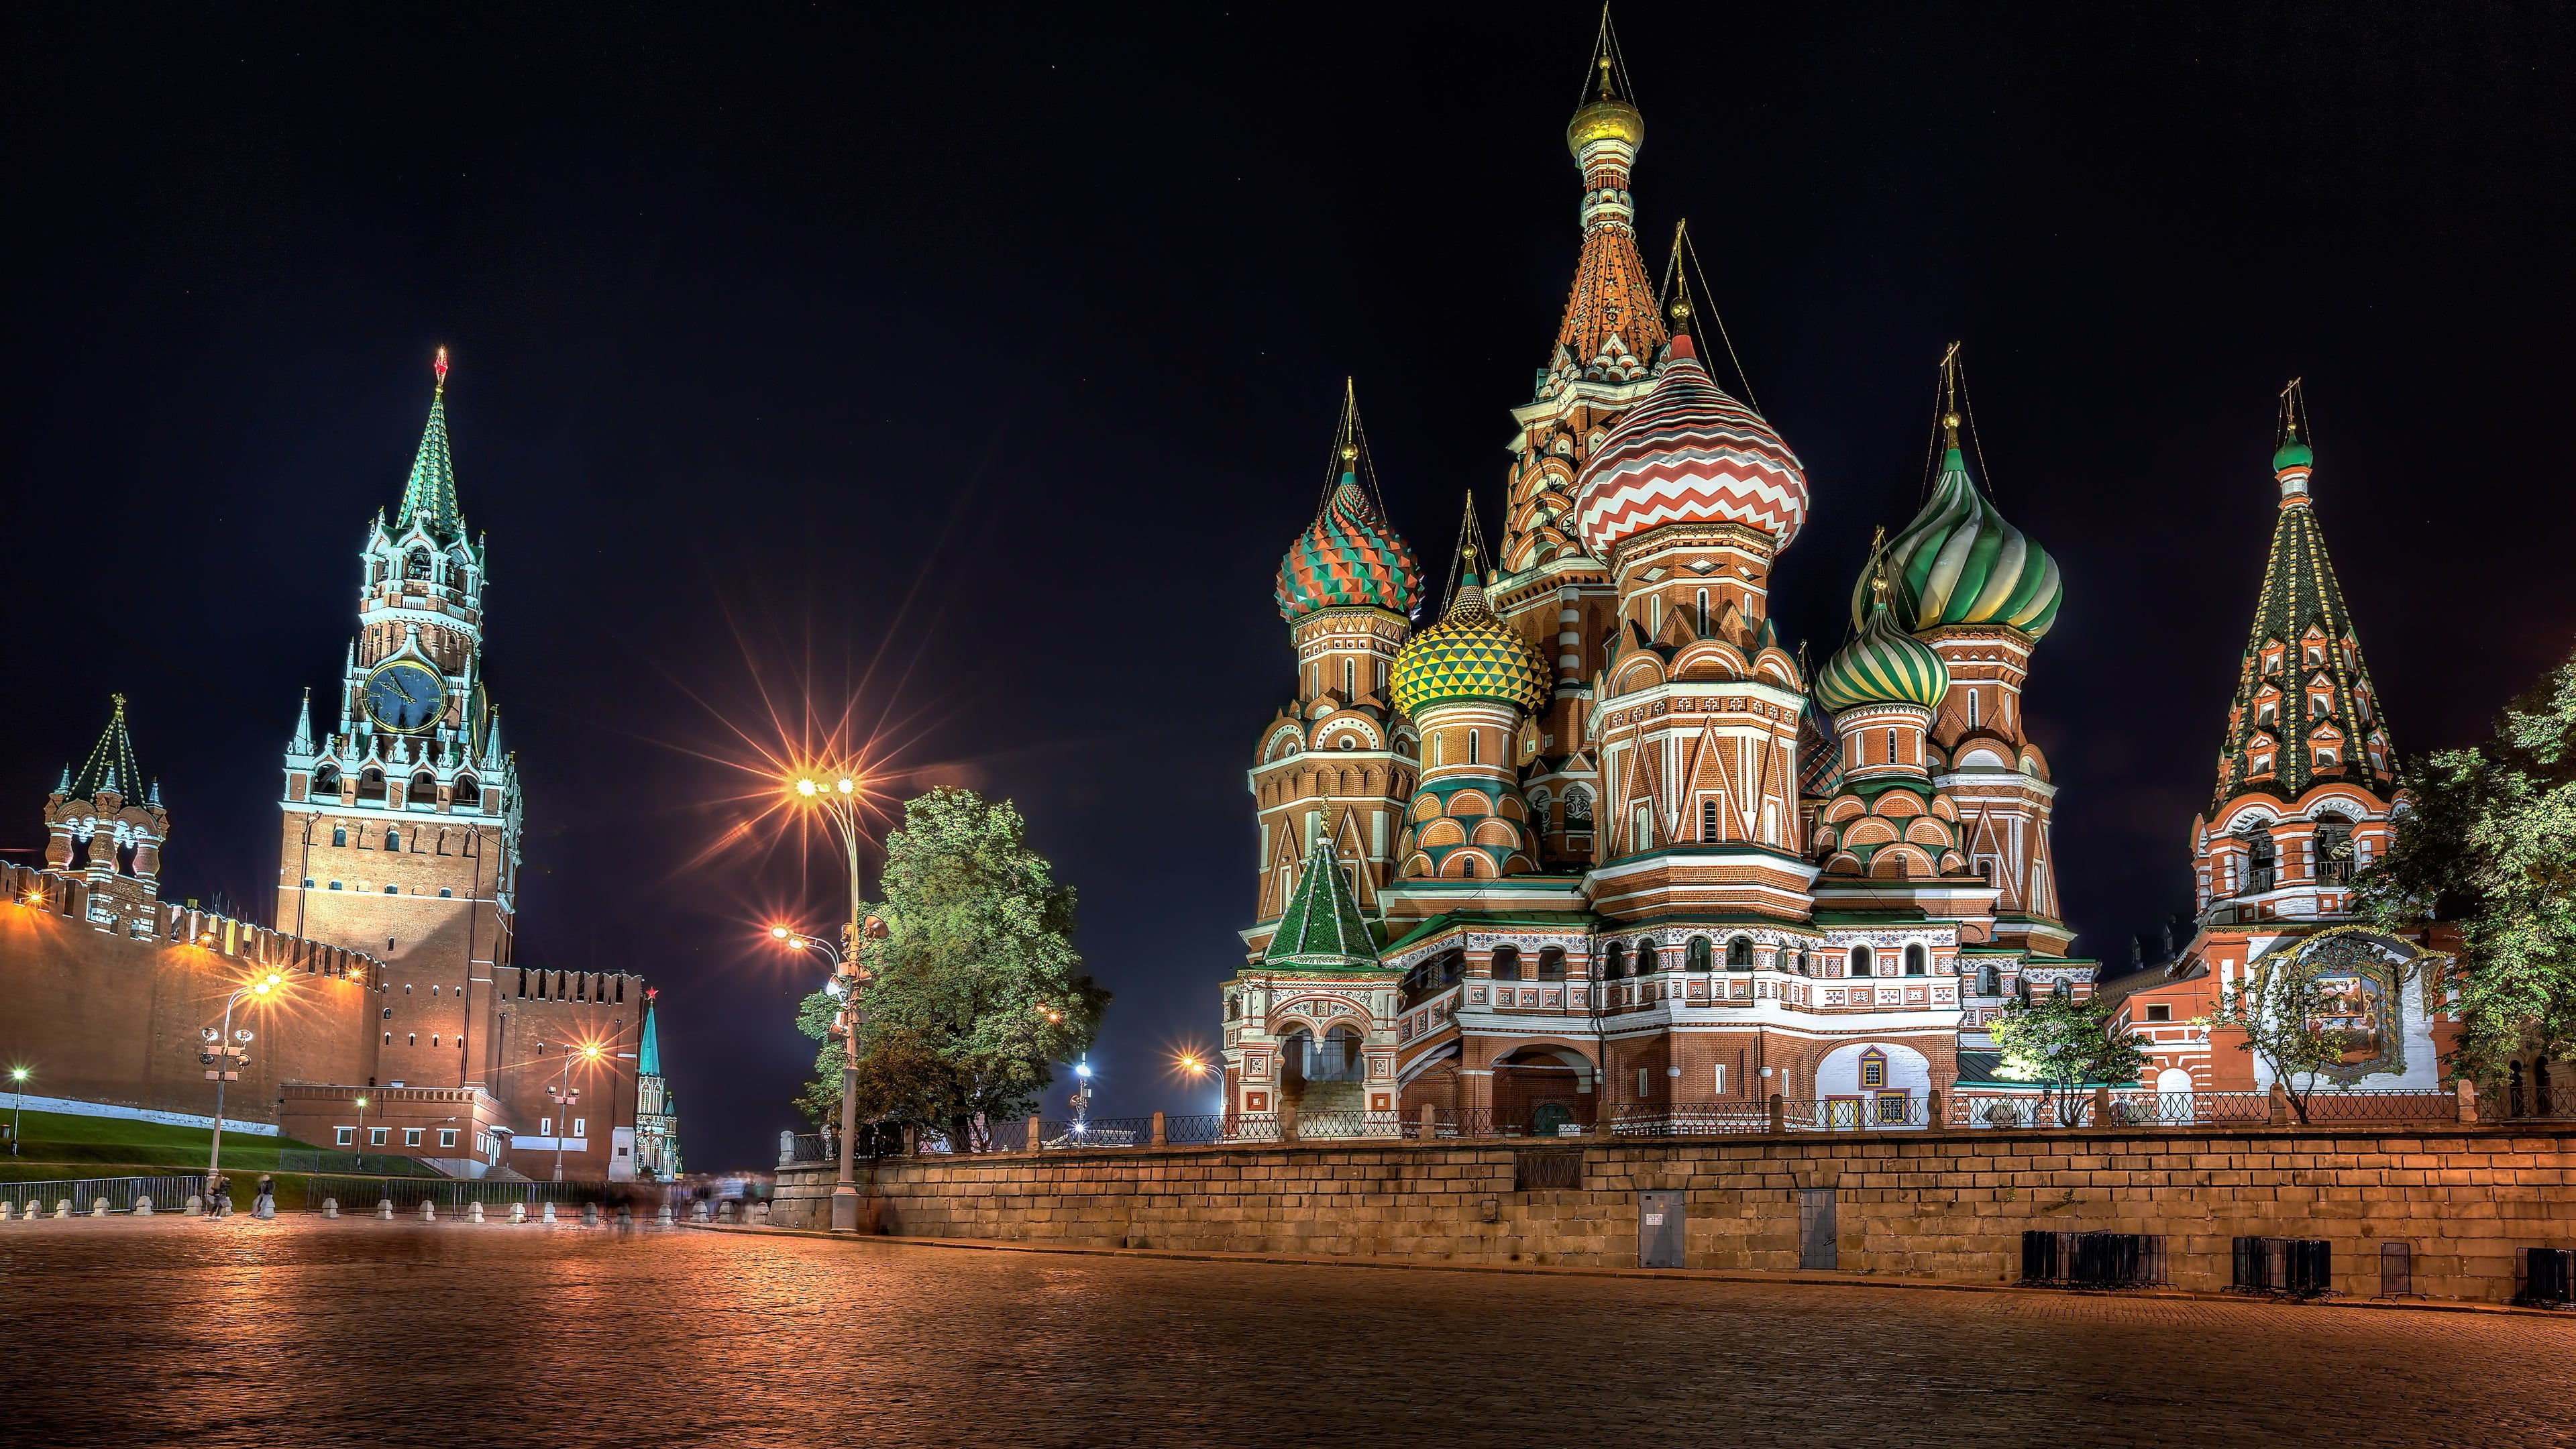 Saint Basil's Cathedral, Russia, night, Moscow, The Kremlin, St. Basil's Cathedral